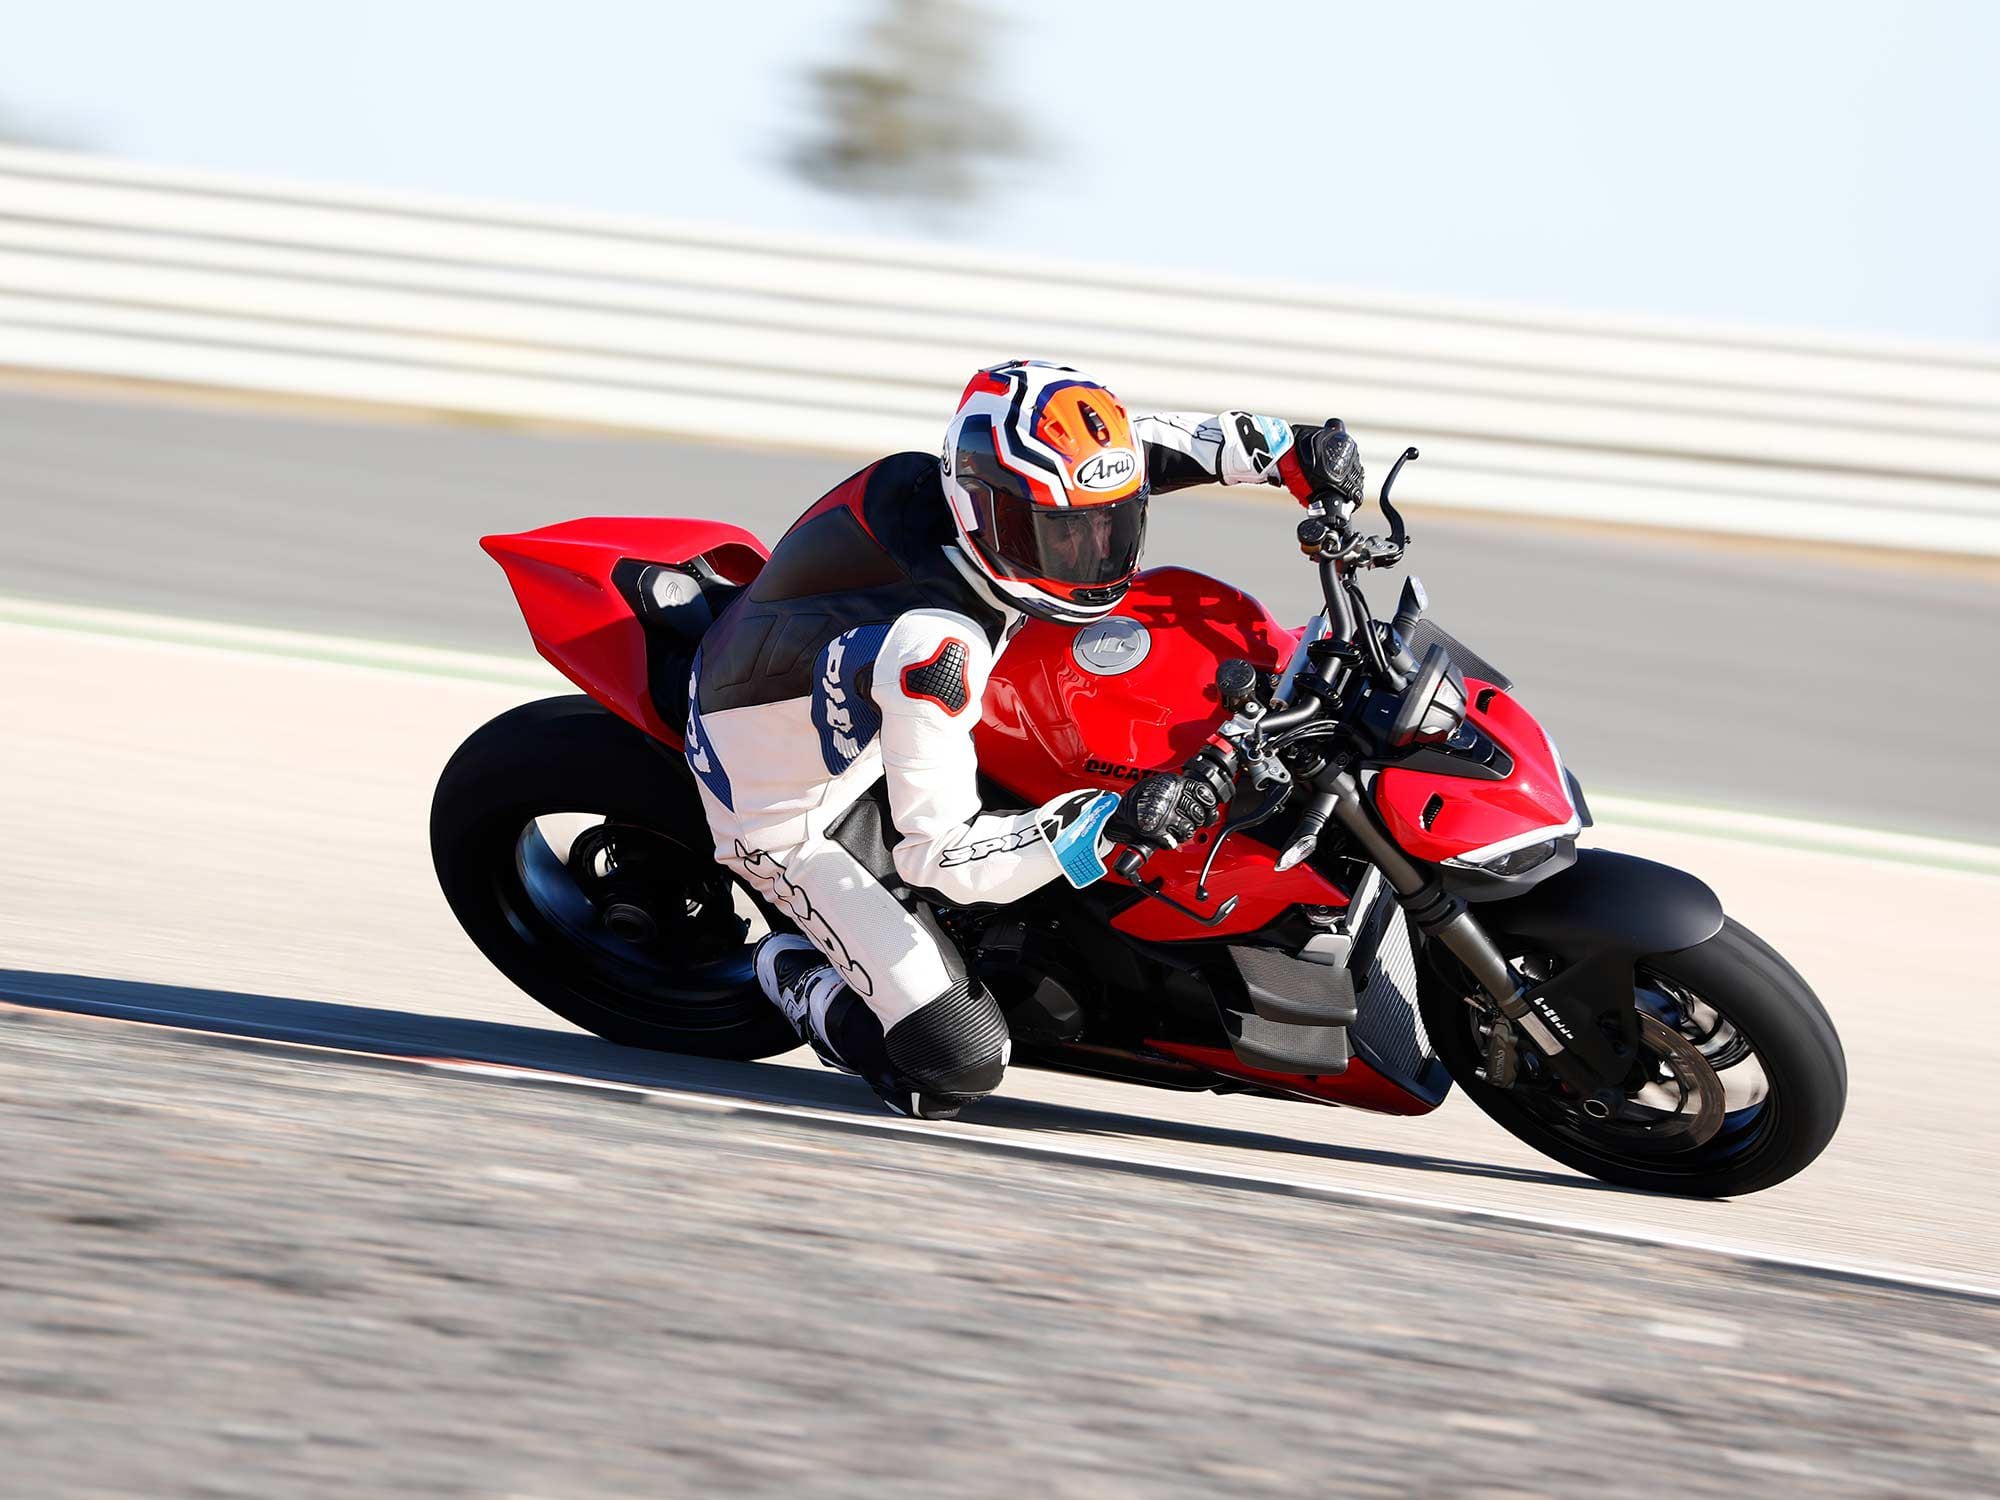 A sticky set of Pirelli Diablo Rosso IV glues the Streetfighter to the road with solid grip and feel, while handling racetrack demands with confidence.